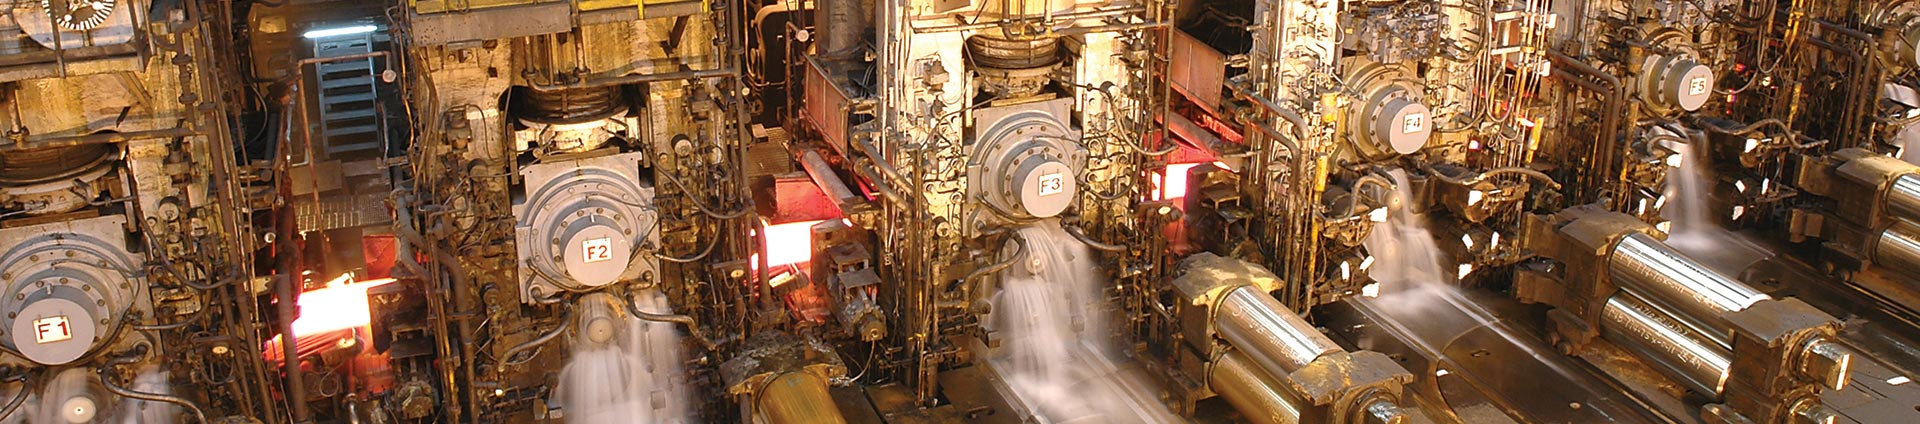 Hot Rolling Mill Image